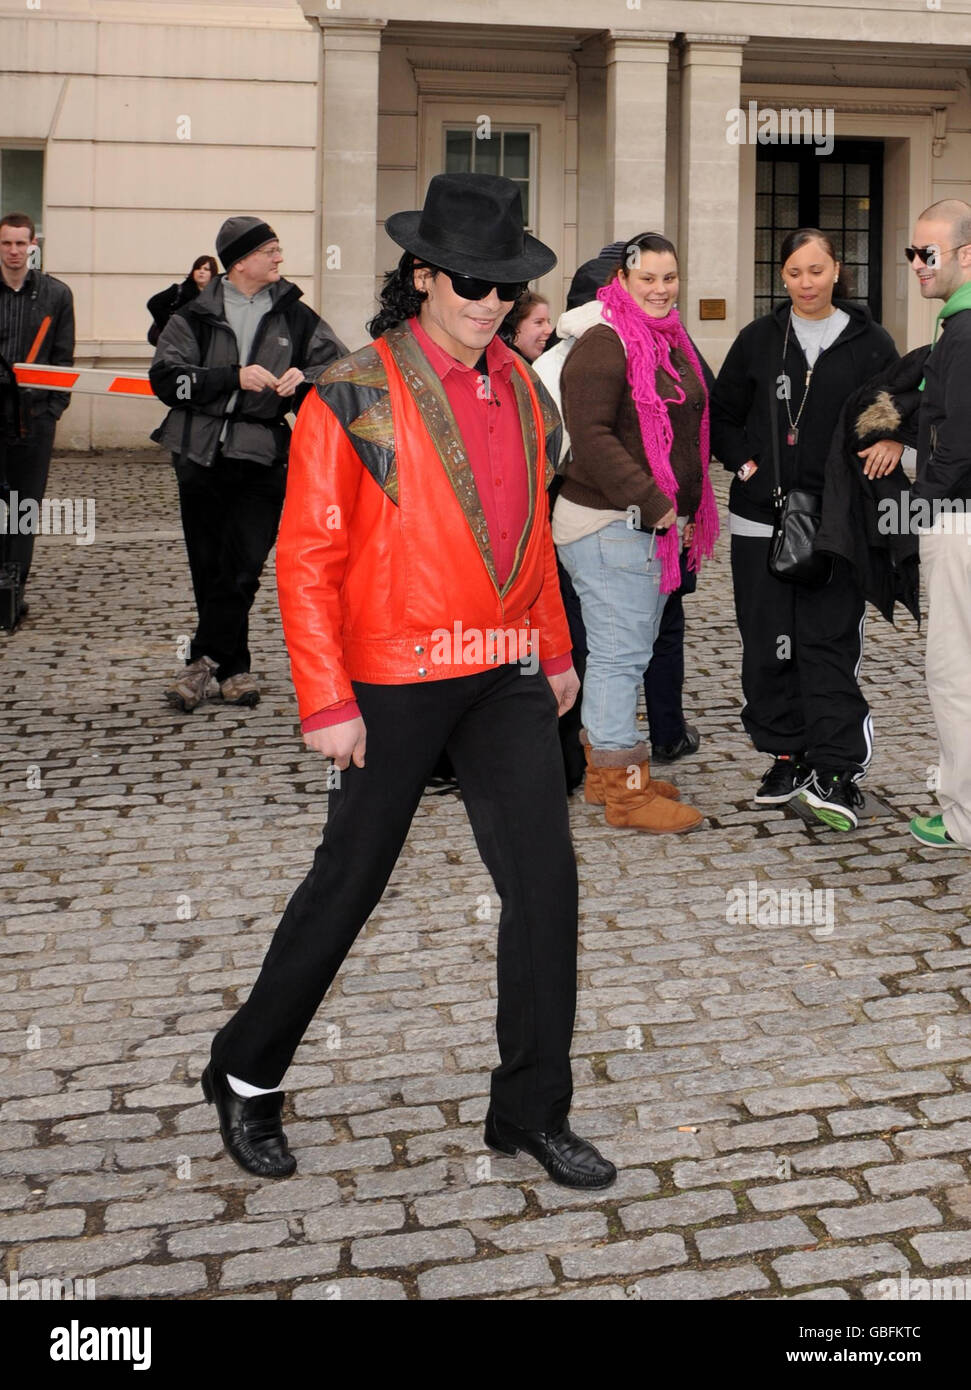 A Michael Jackson look-a-like entertains waiting fans outside the Lanesborough Hotel in central London where pop star Michael Jackson is rumoured to be staying. Stock Photo